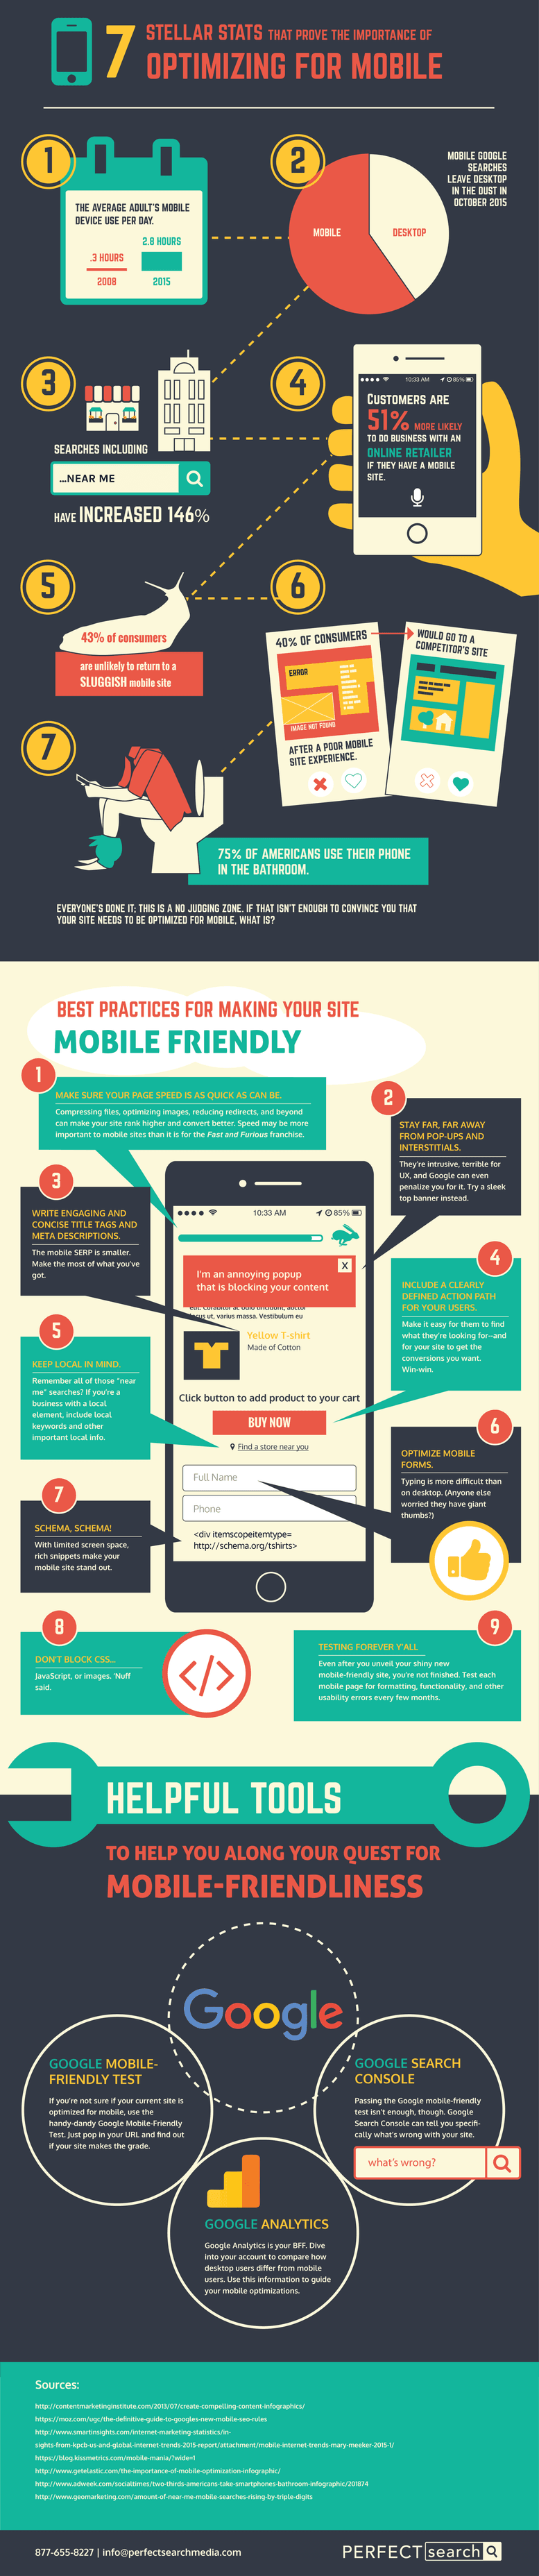 How to Optimize For Mobile in A New Mobile First World Infographic